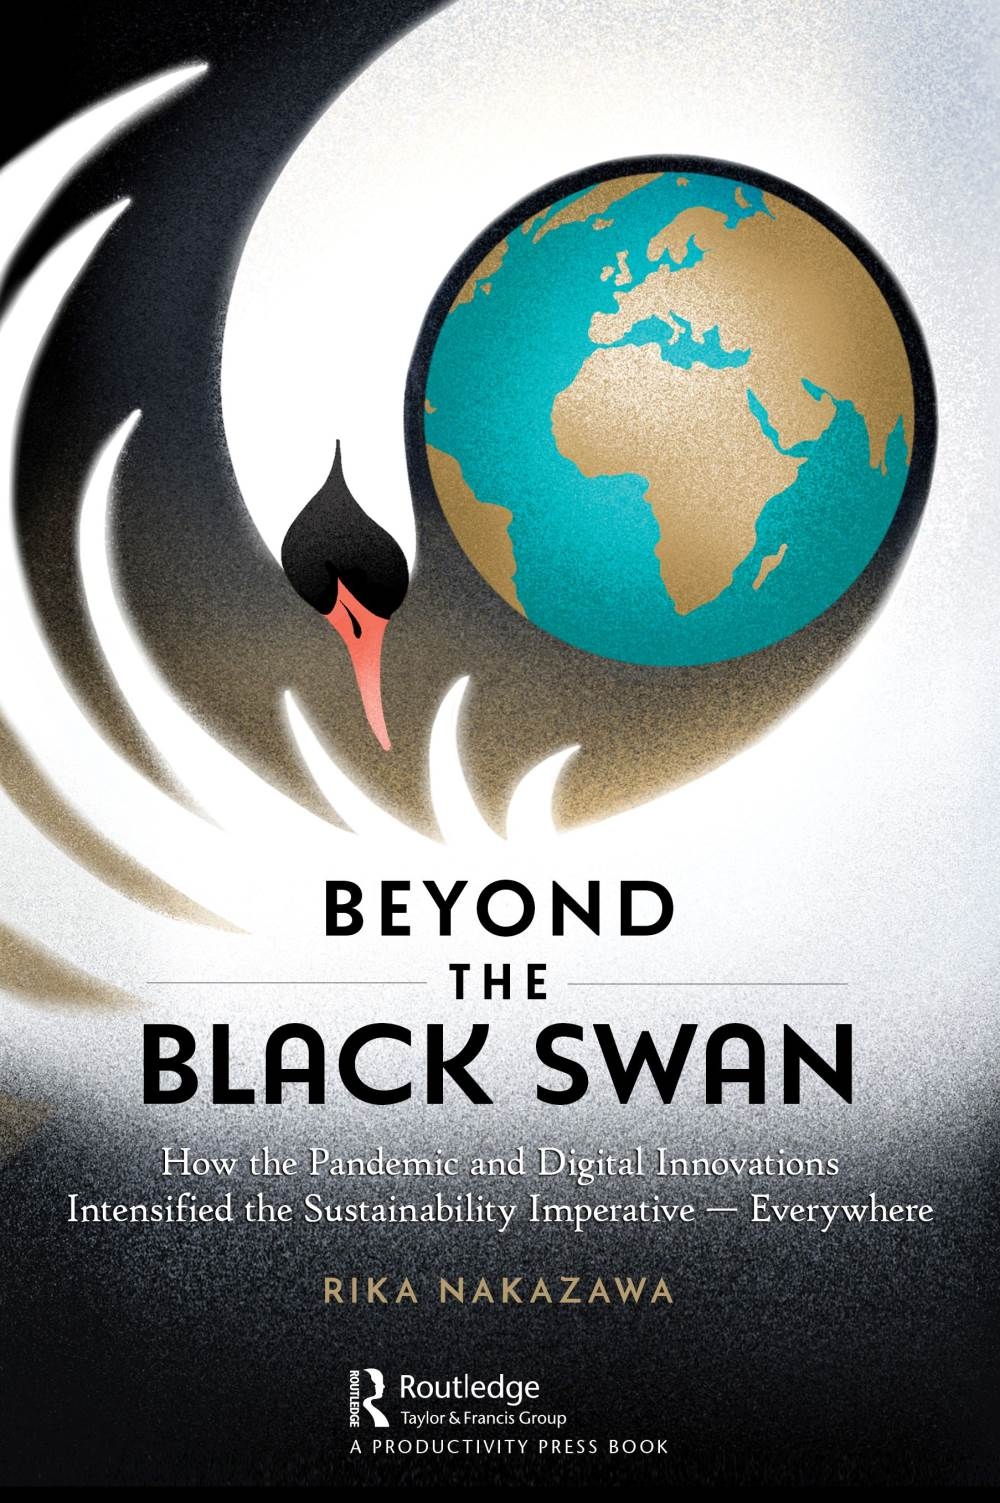 Beyond the Black Swan: How the Pandemic Intensified the Sustainability Imperative - Everywhere